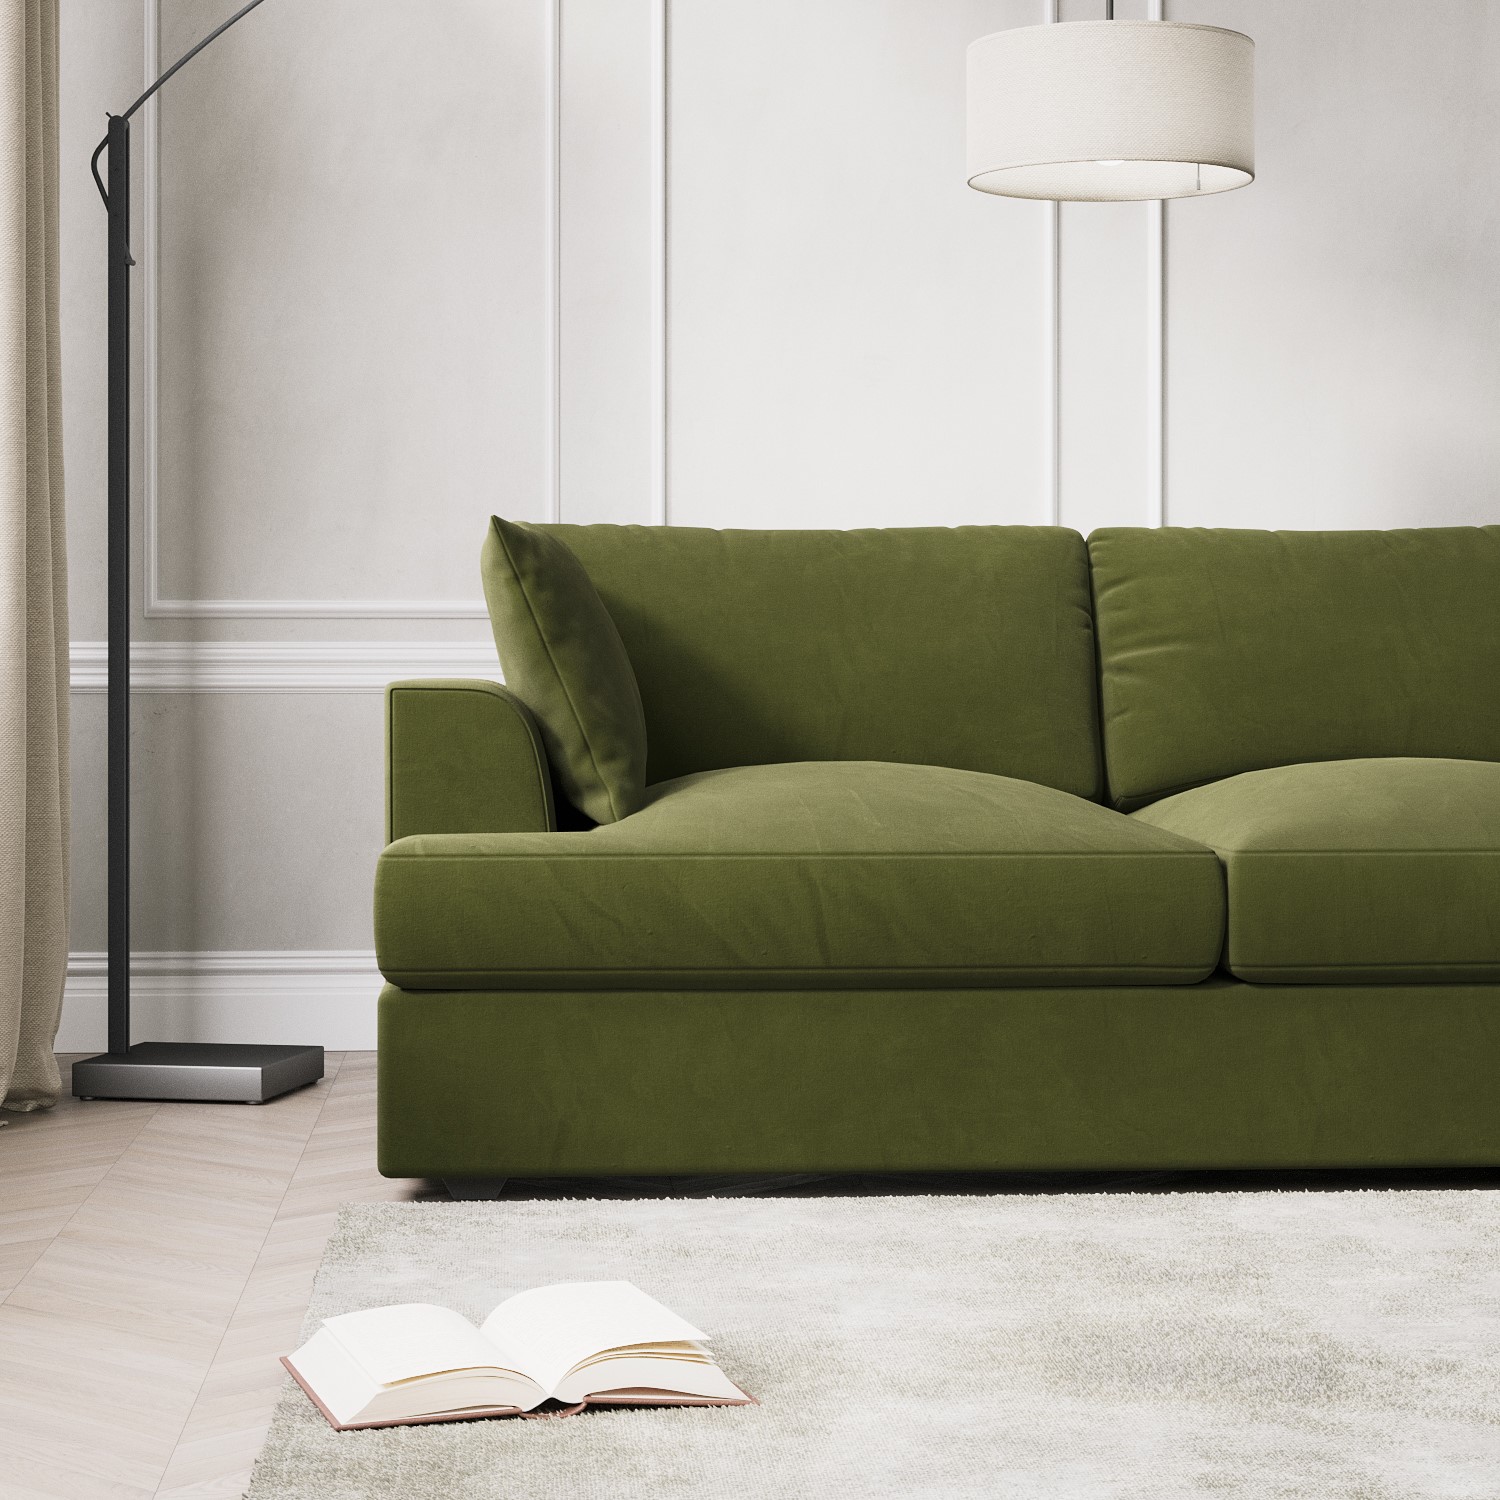 Read more about Olive green velvet right hand l shaped sofa seats 4 august